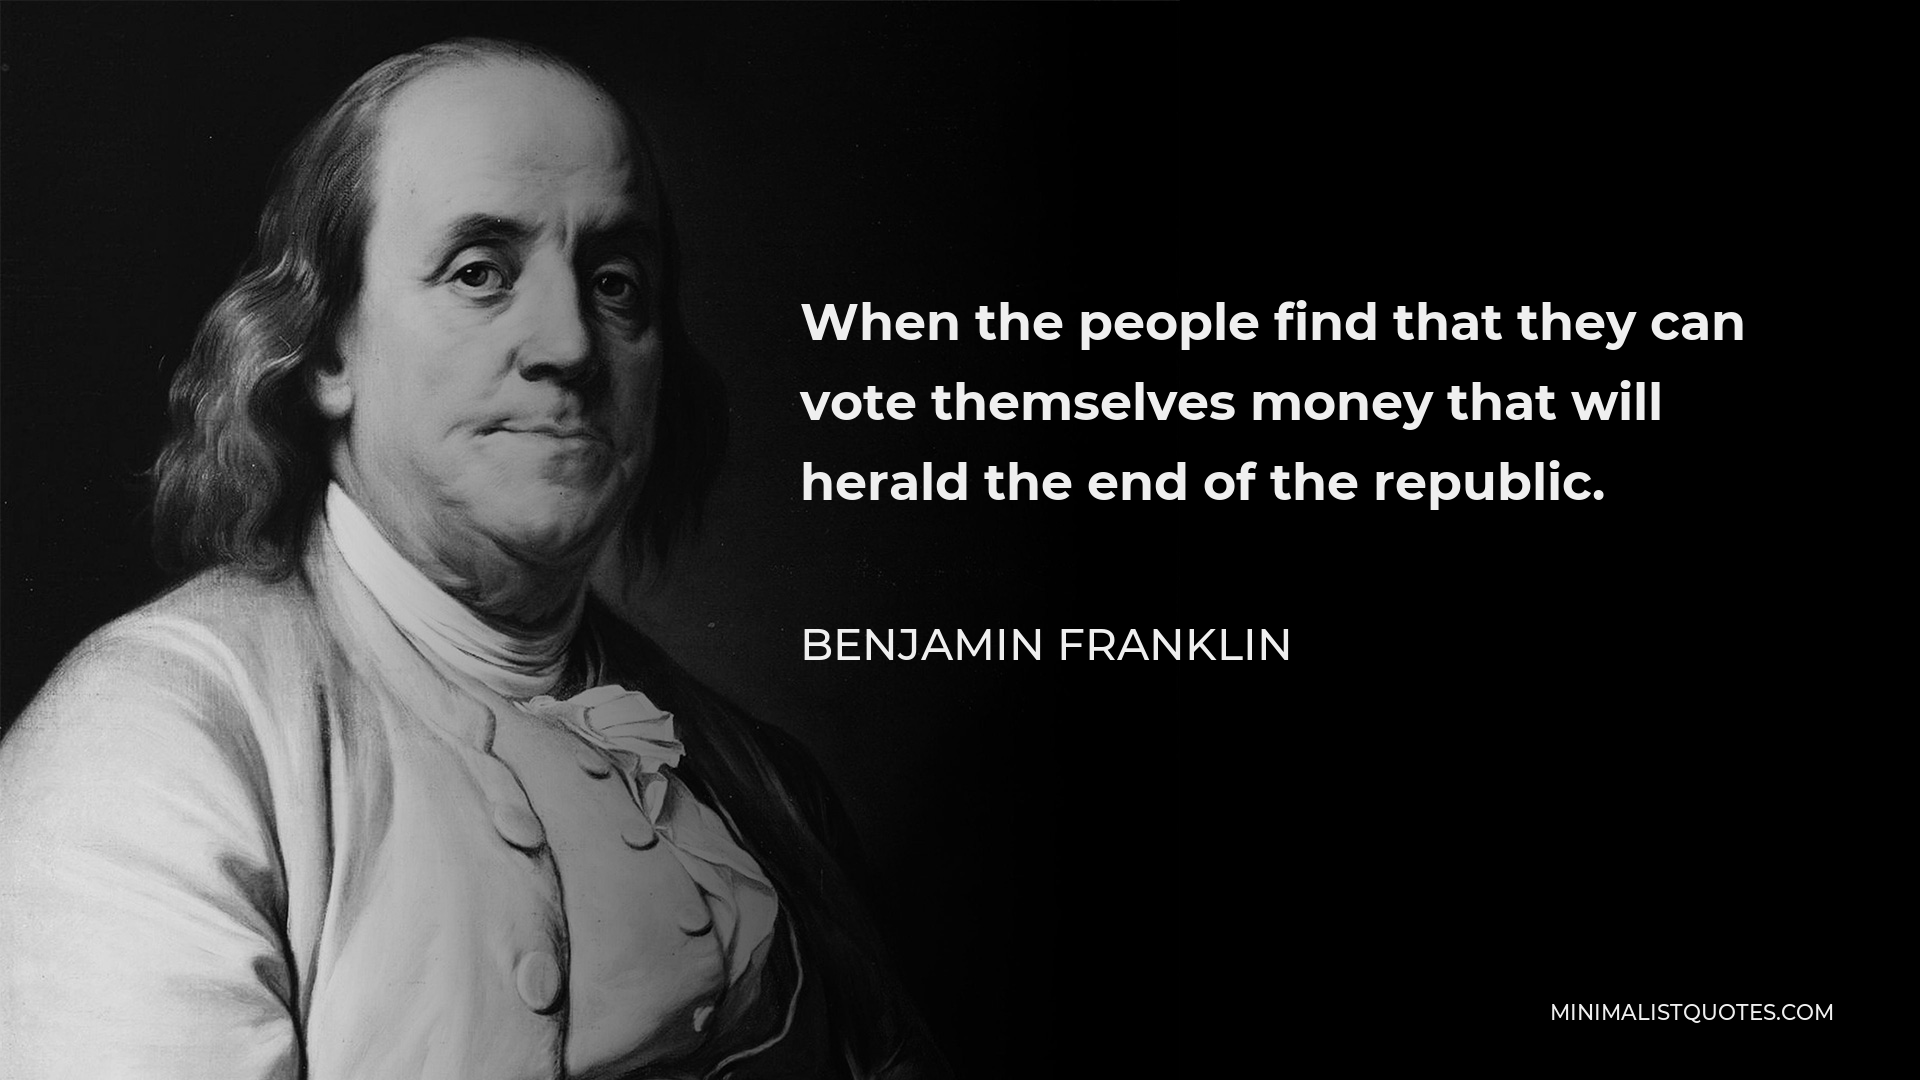 Benjamin Franklin Quote - When the people find that they can vote themselves money that will herald the end of the republic.